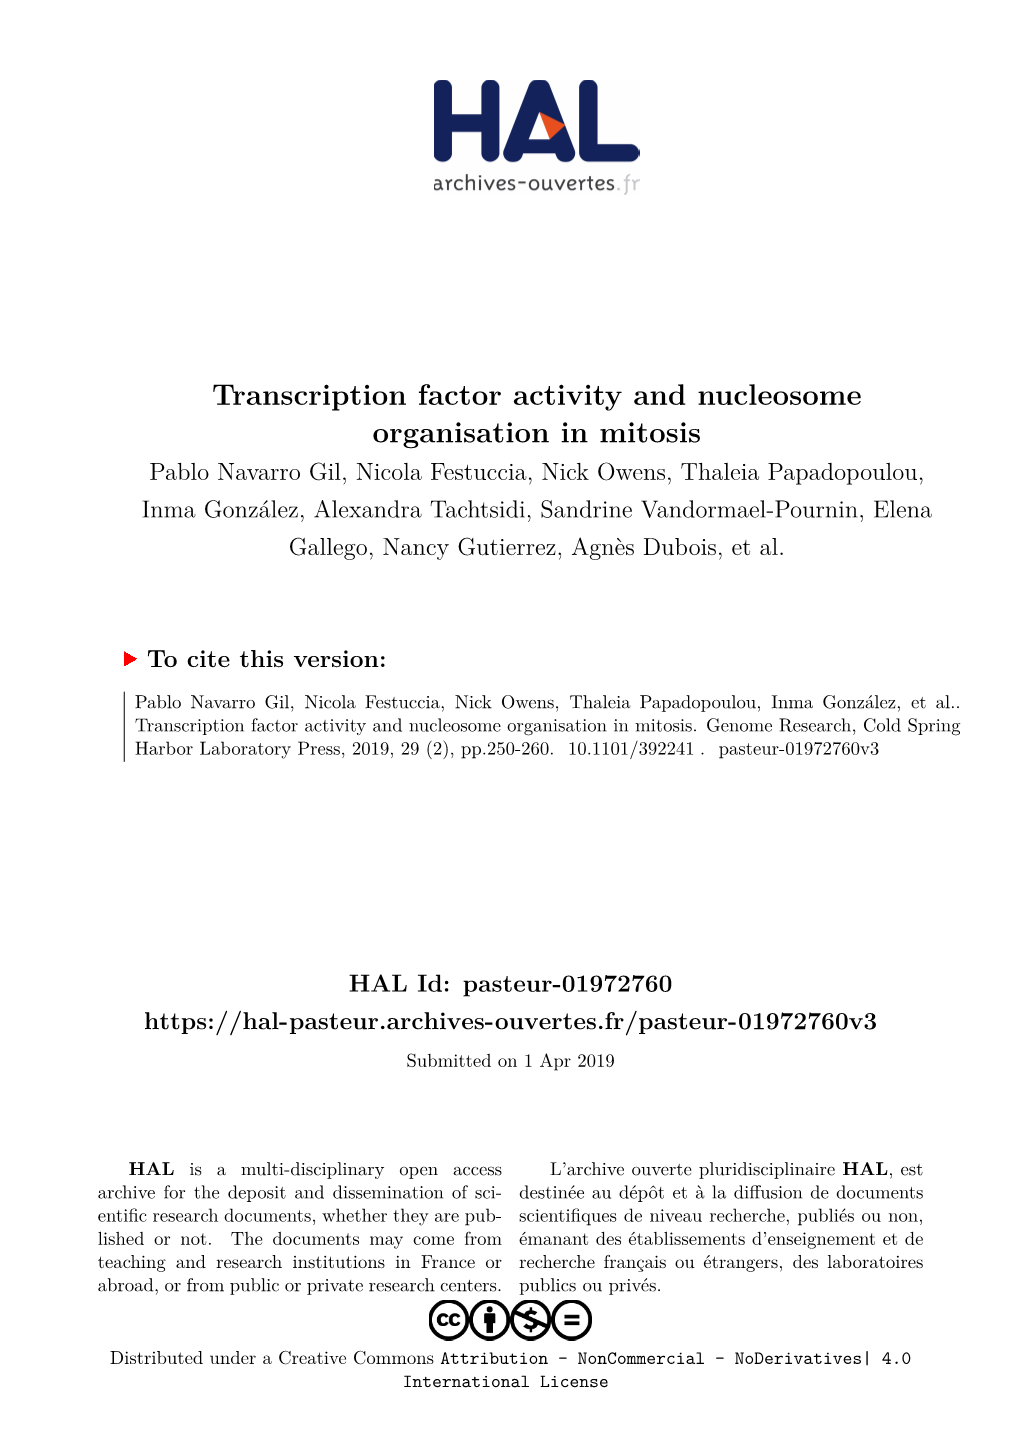 Transcription Factor Activity and Nucleosome Organisation in Mitosis